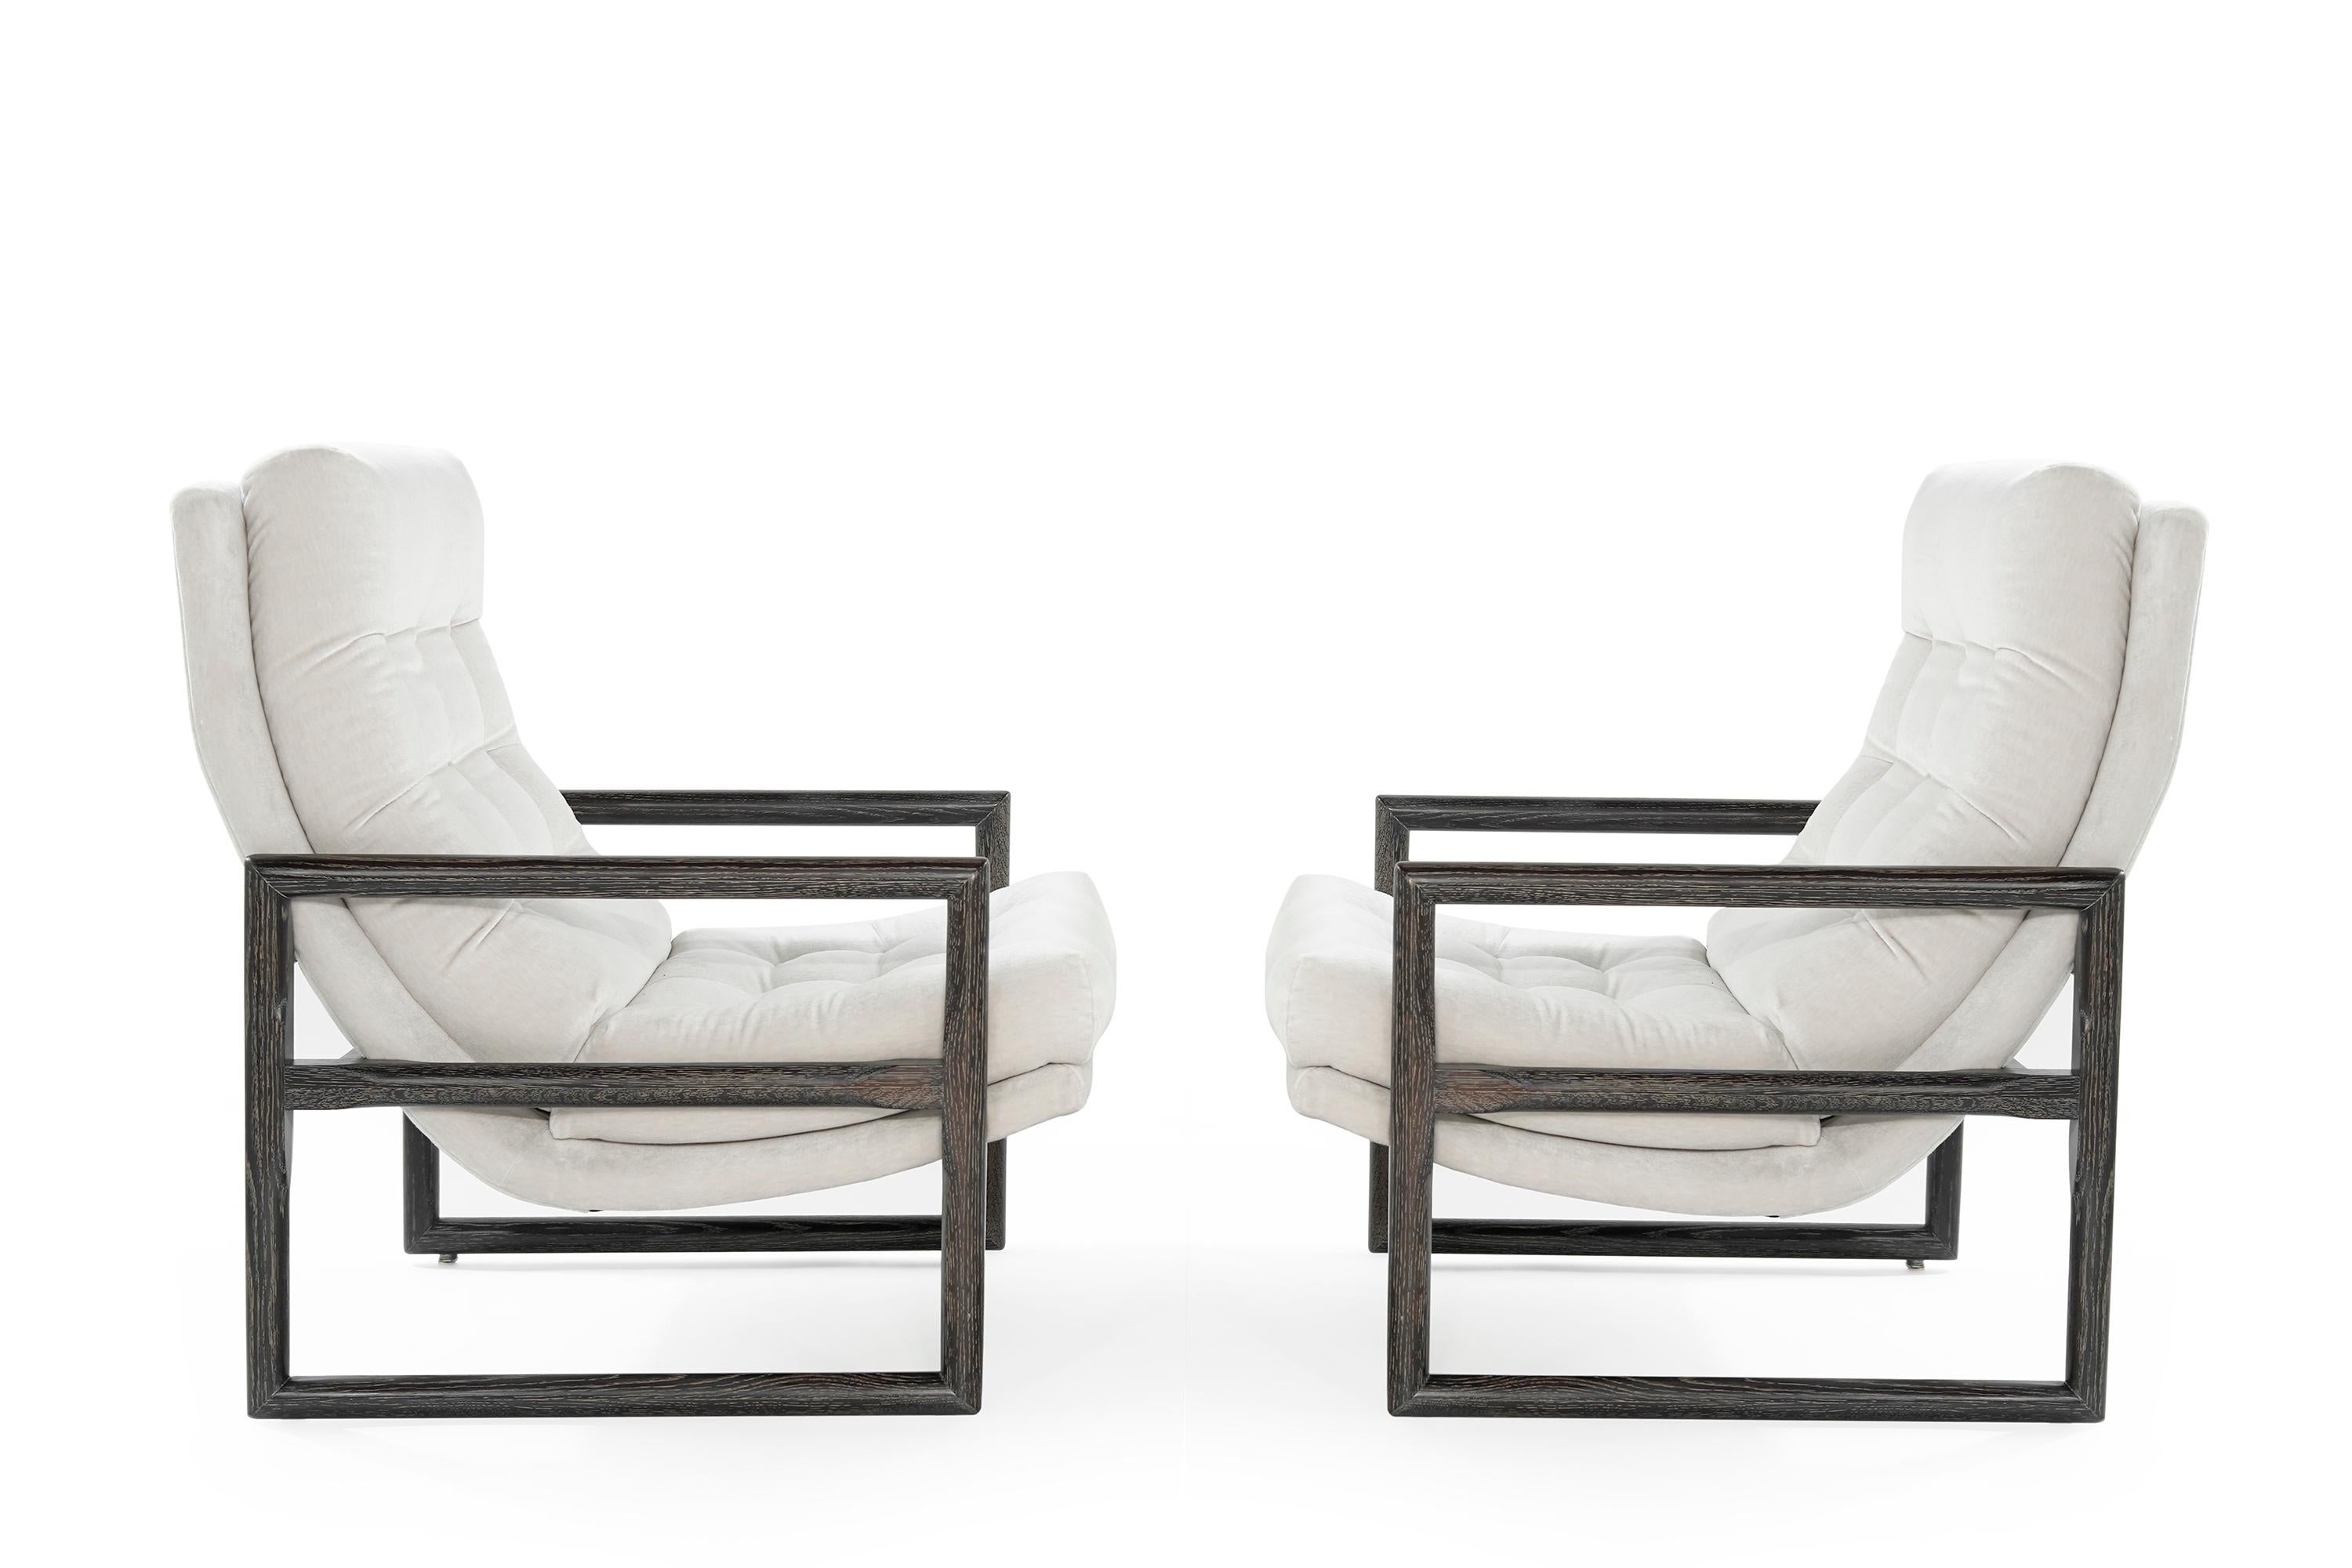 Pair of sculptural lounge chairs featuring newly cerused oak fames re-upholstered in light grey velvet by Holly Hunt.